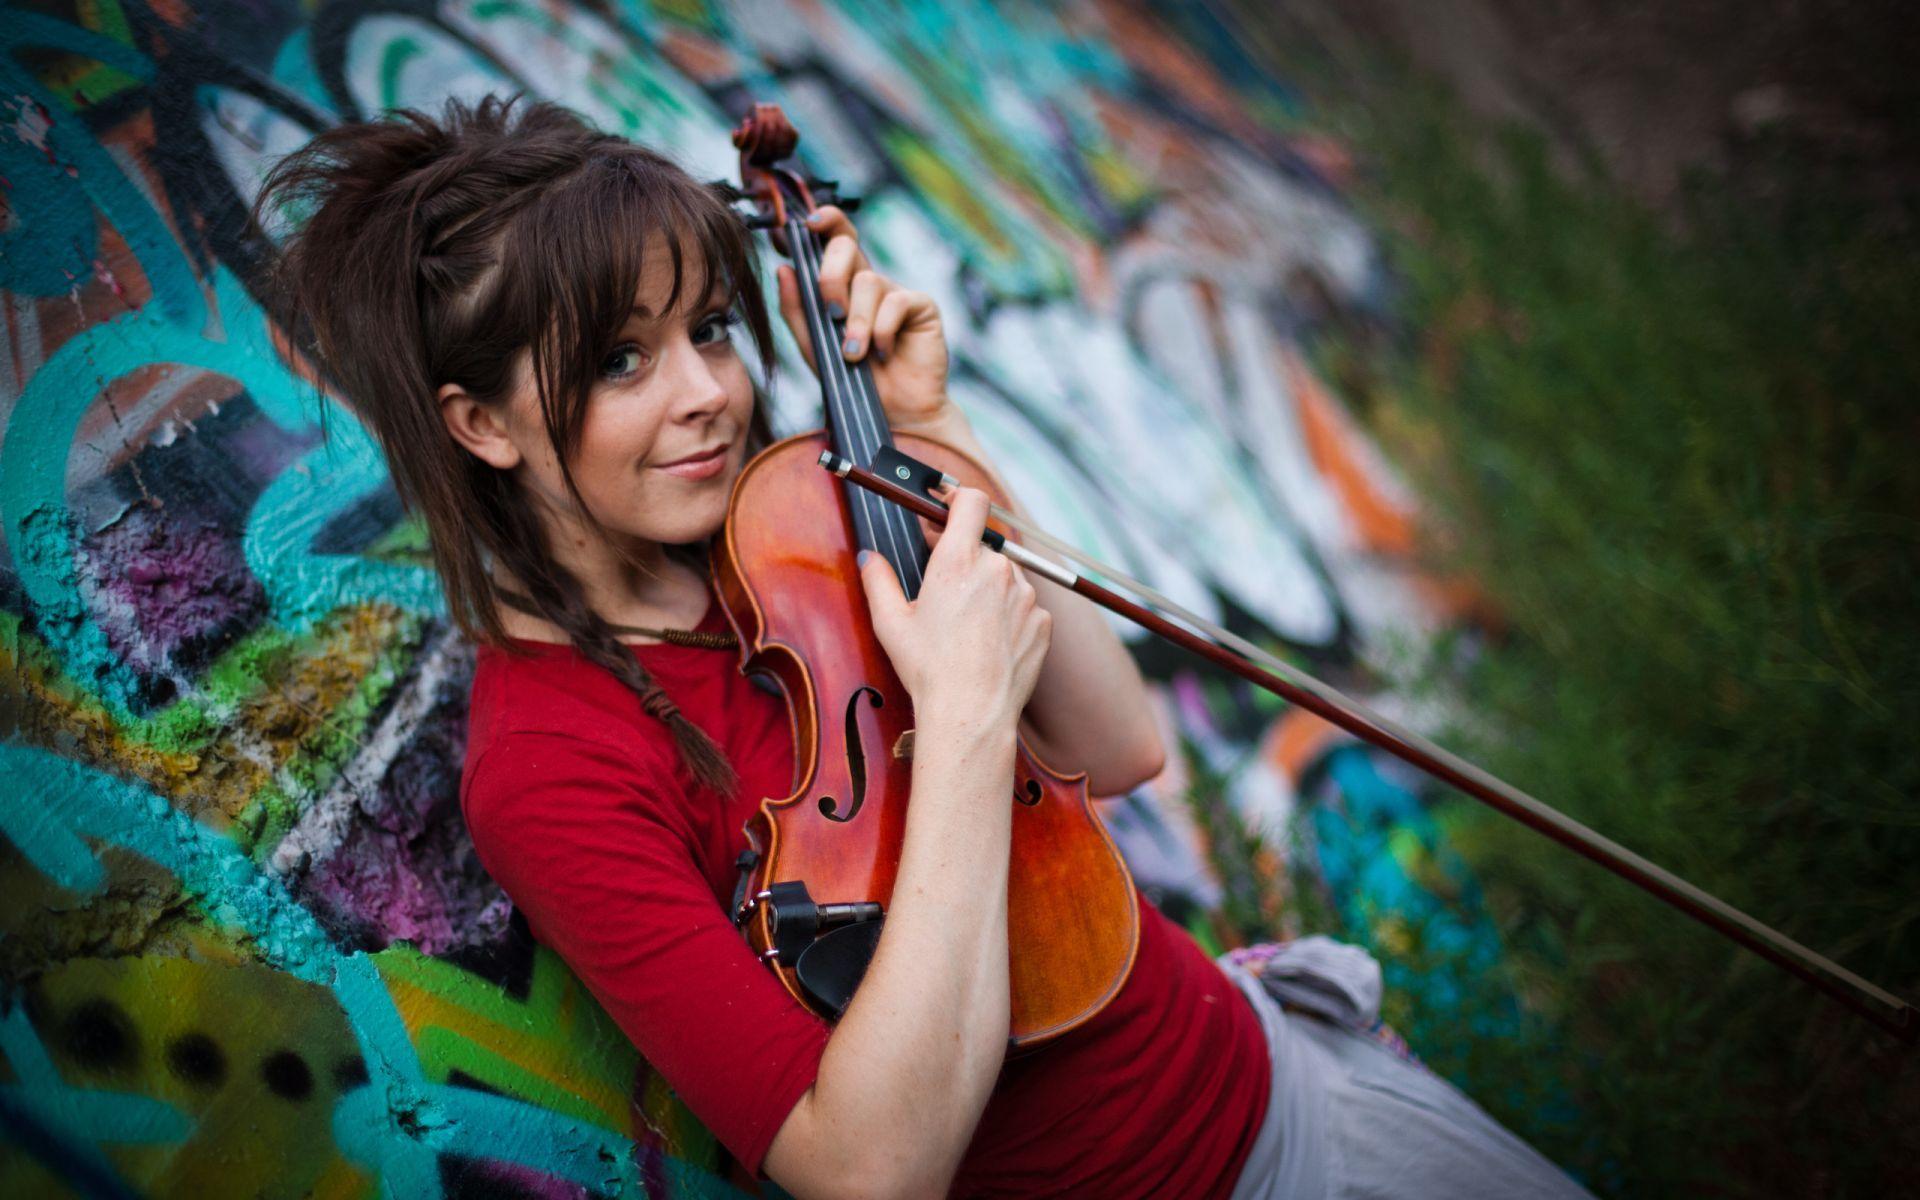 I found Lilly's real life doppelganger! Lindsey Stirling!